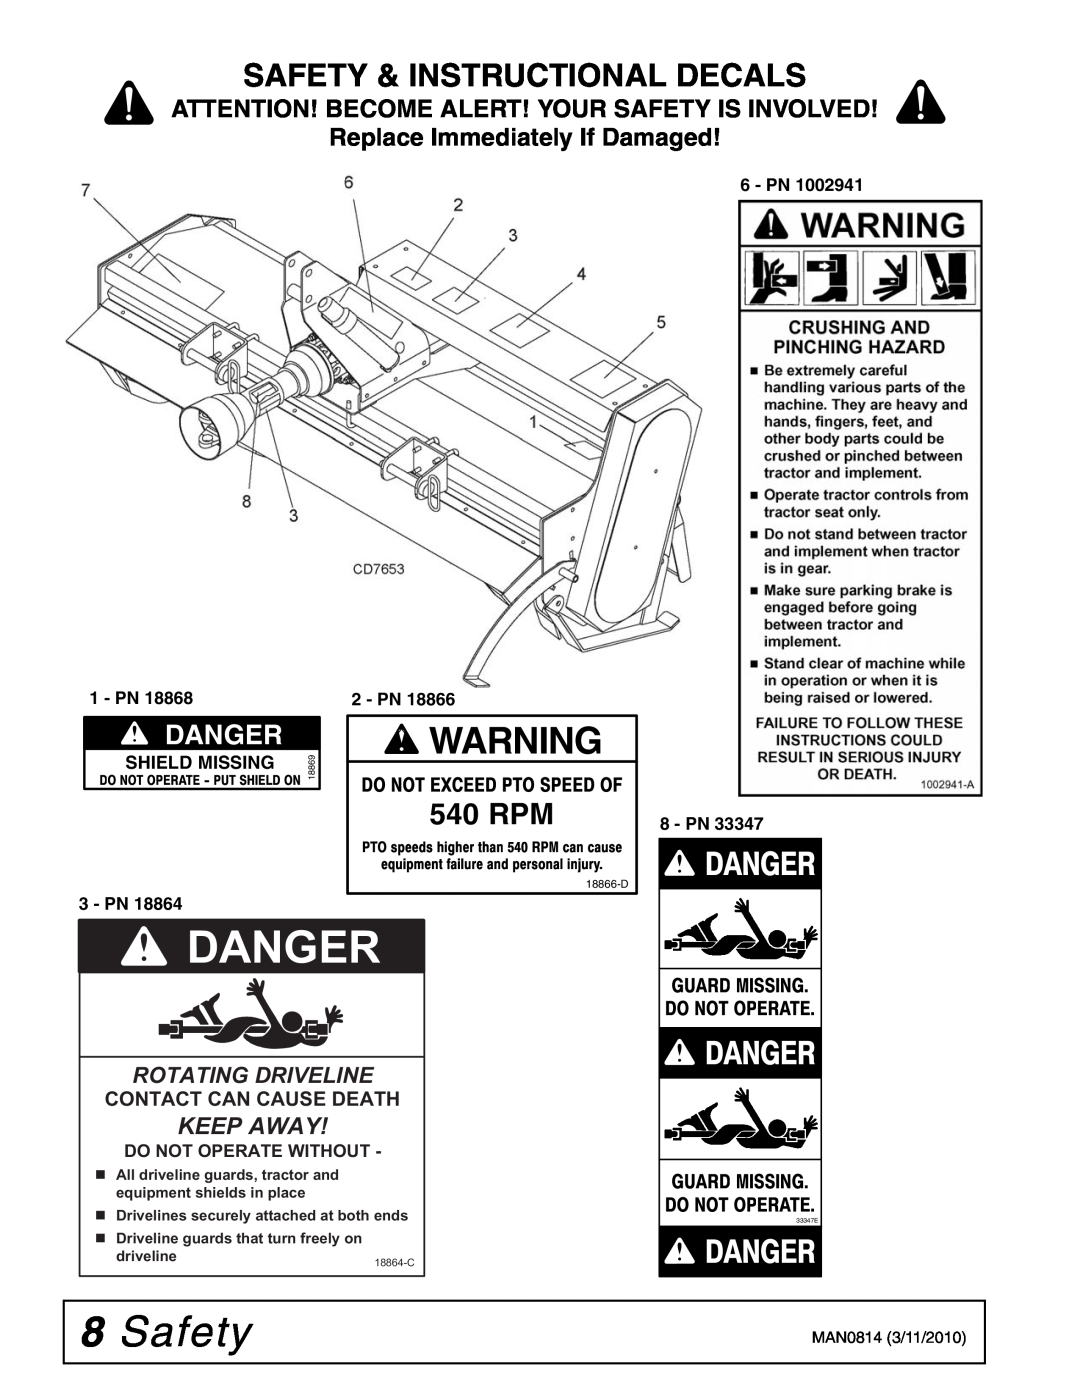 Woods Equipment TS52 Safety & Instructional Decals, Replace Immediately If Damaged, Contact Can Cause Death, Danger 